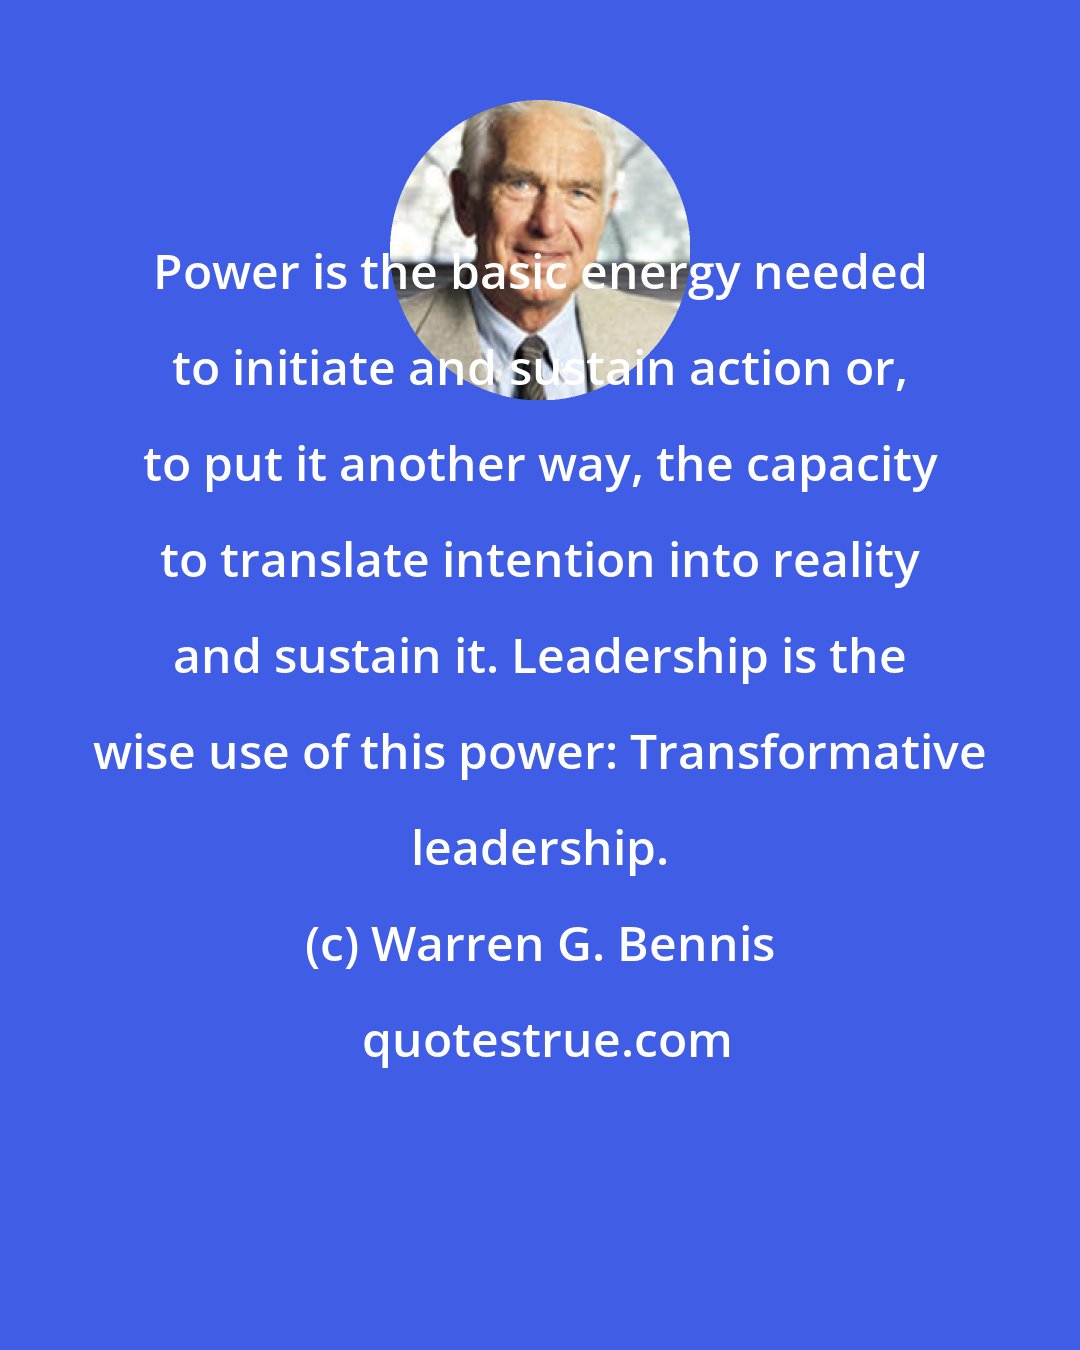 Warren G. Bennis: Power is the basic energy needed to initiate and sustain action or, to put it another way, the capacity to translate intention into reality and sustain it. Leadership is the wise use of this power: Transformative leadership.